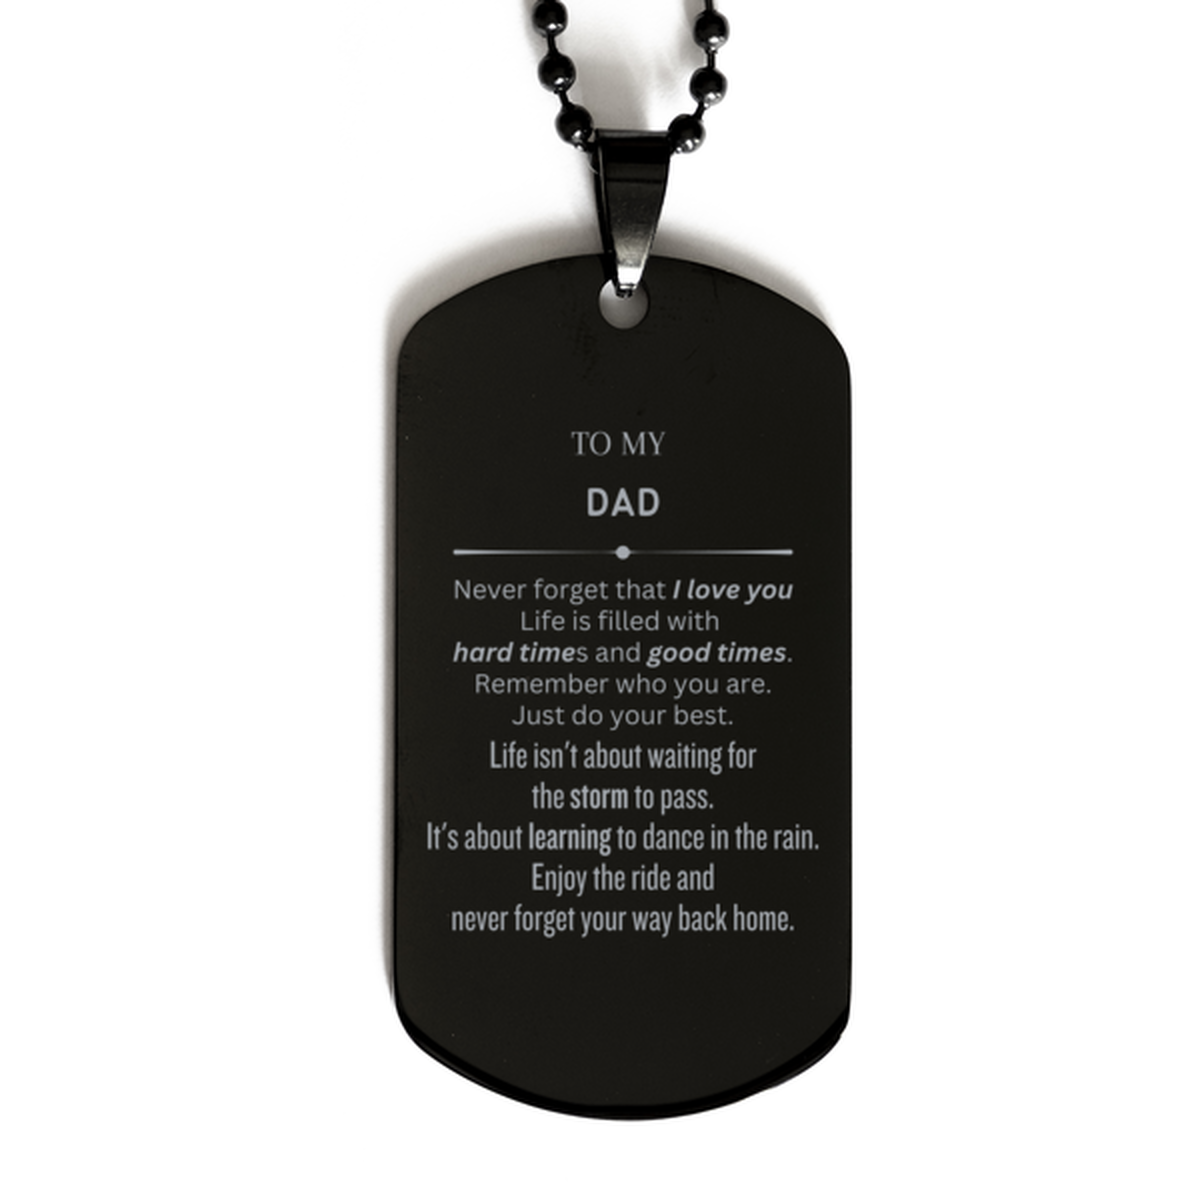 Christmas Dad Black Dog Tag Gifts, To My Dad Birthday Thank You Gifts For Dad, Graduation Unique Gifts For Dad To My Dad Never forget that I love you life is filled with hard times and good times. Remember who you are. Just do your best